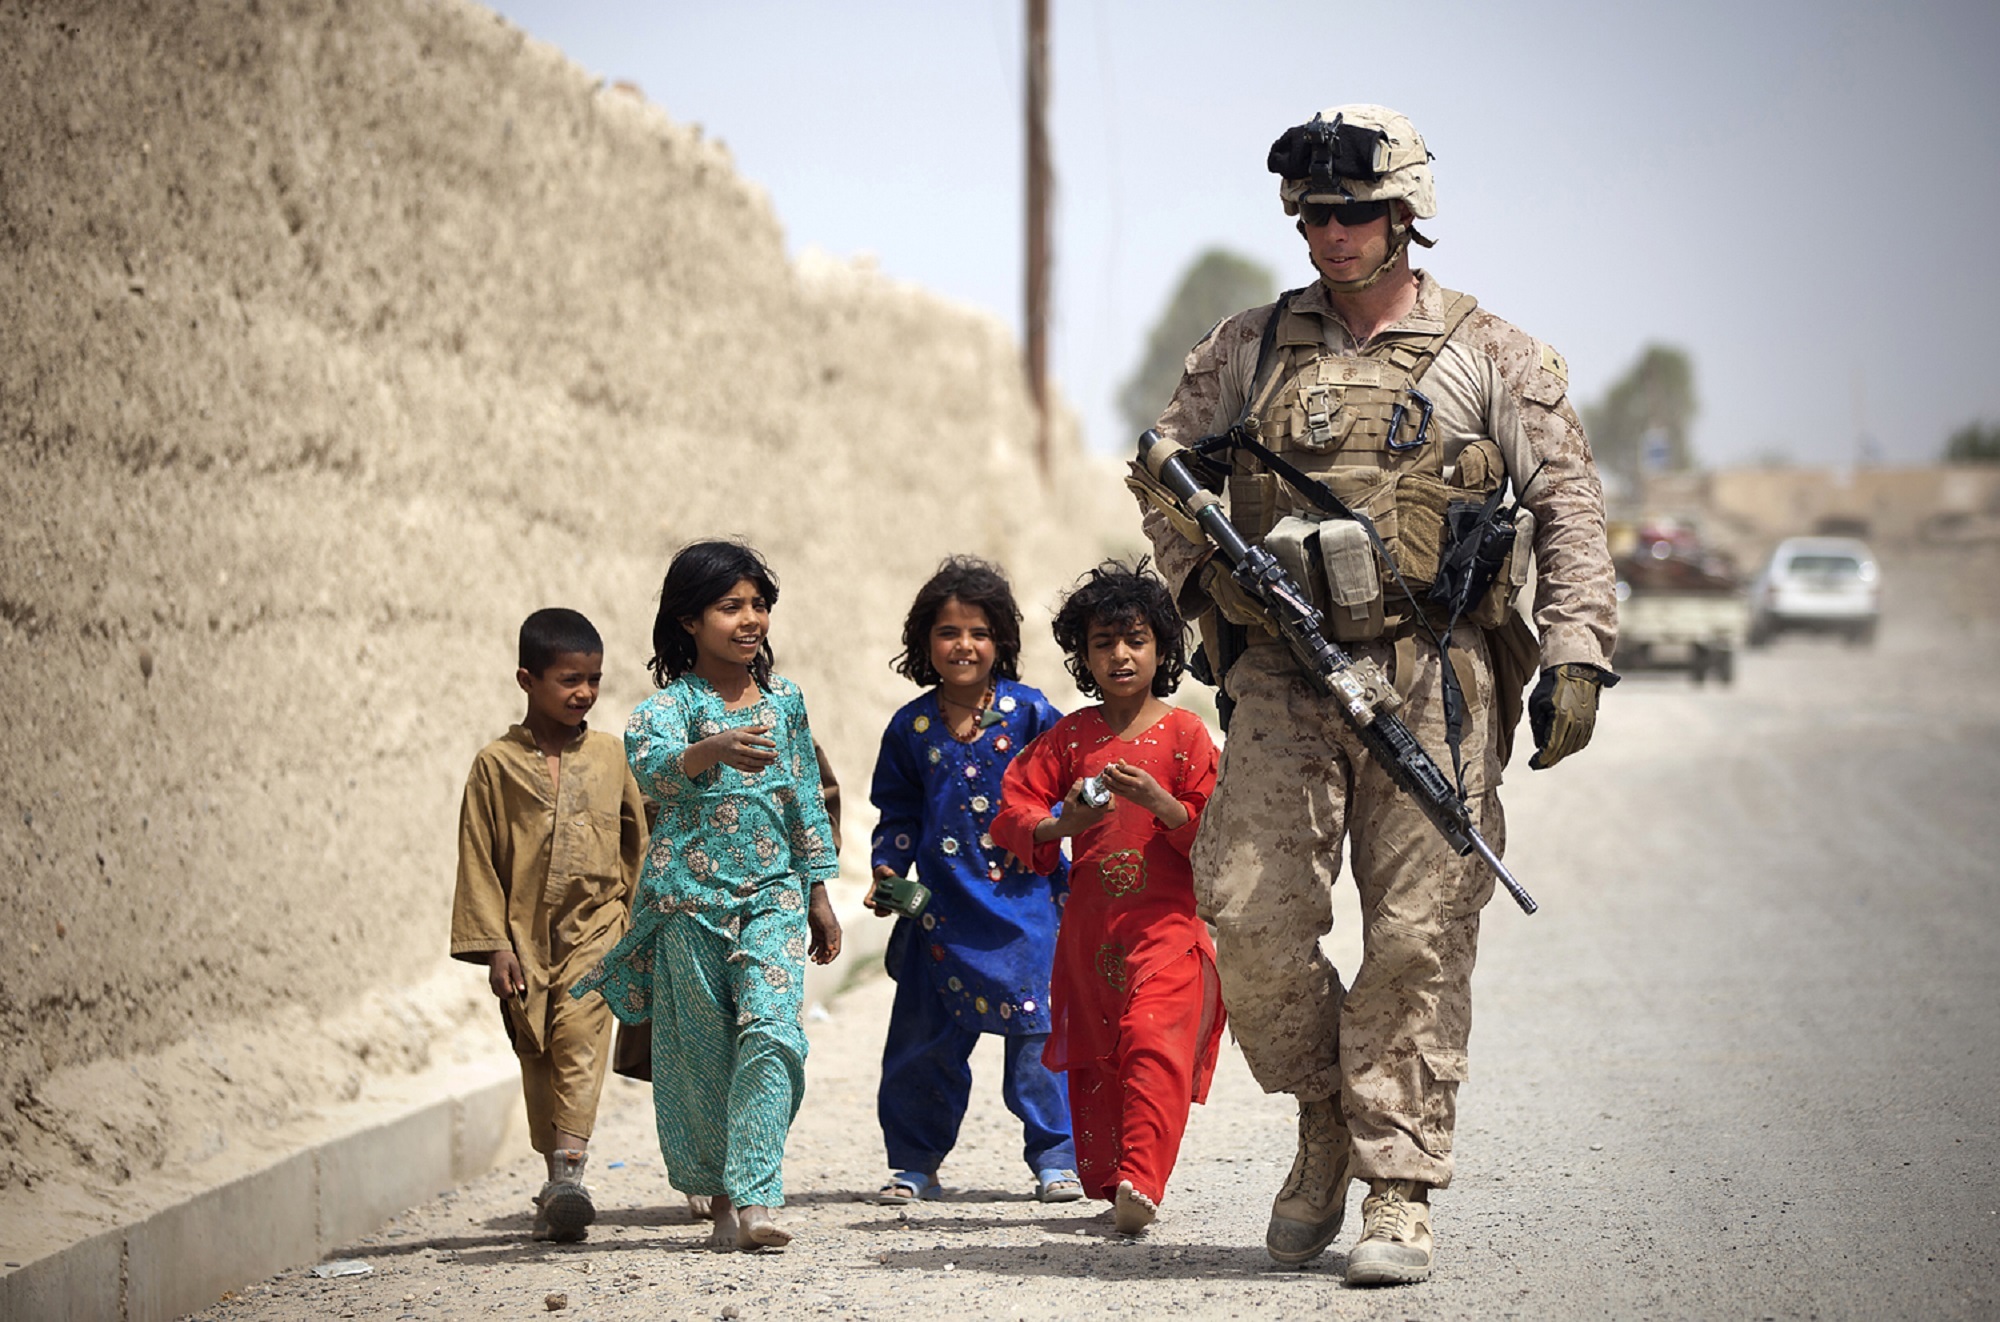 Soldier with the Kids, American, Army, Kids, Saviour, HQ Photo